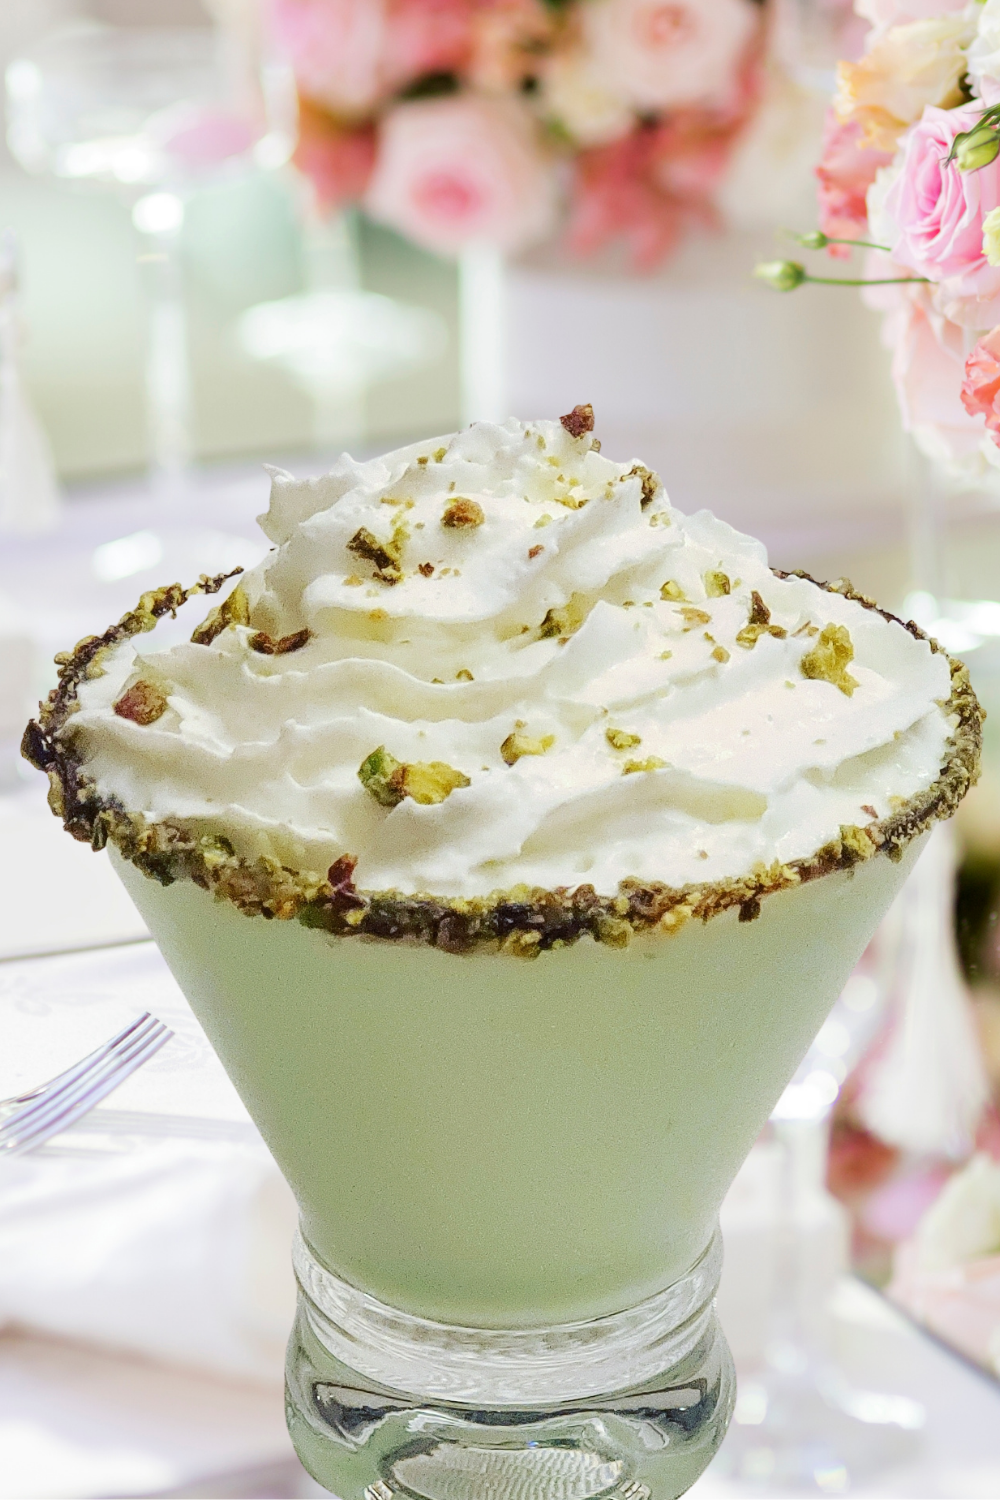 Pistachio Martini Recipe at Home – A Must Try Cocktail Recipe